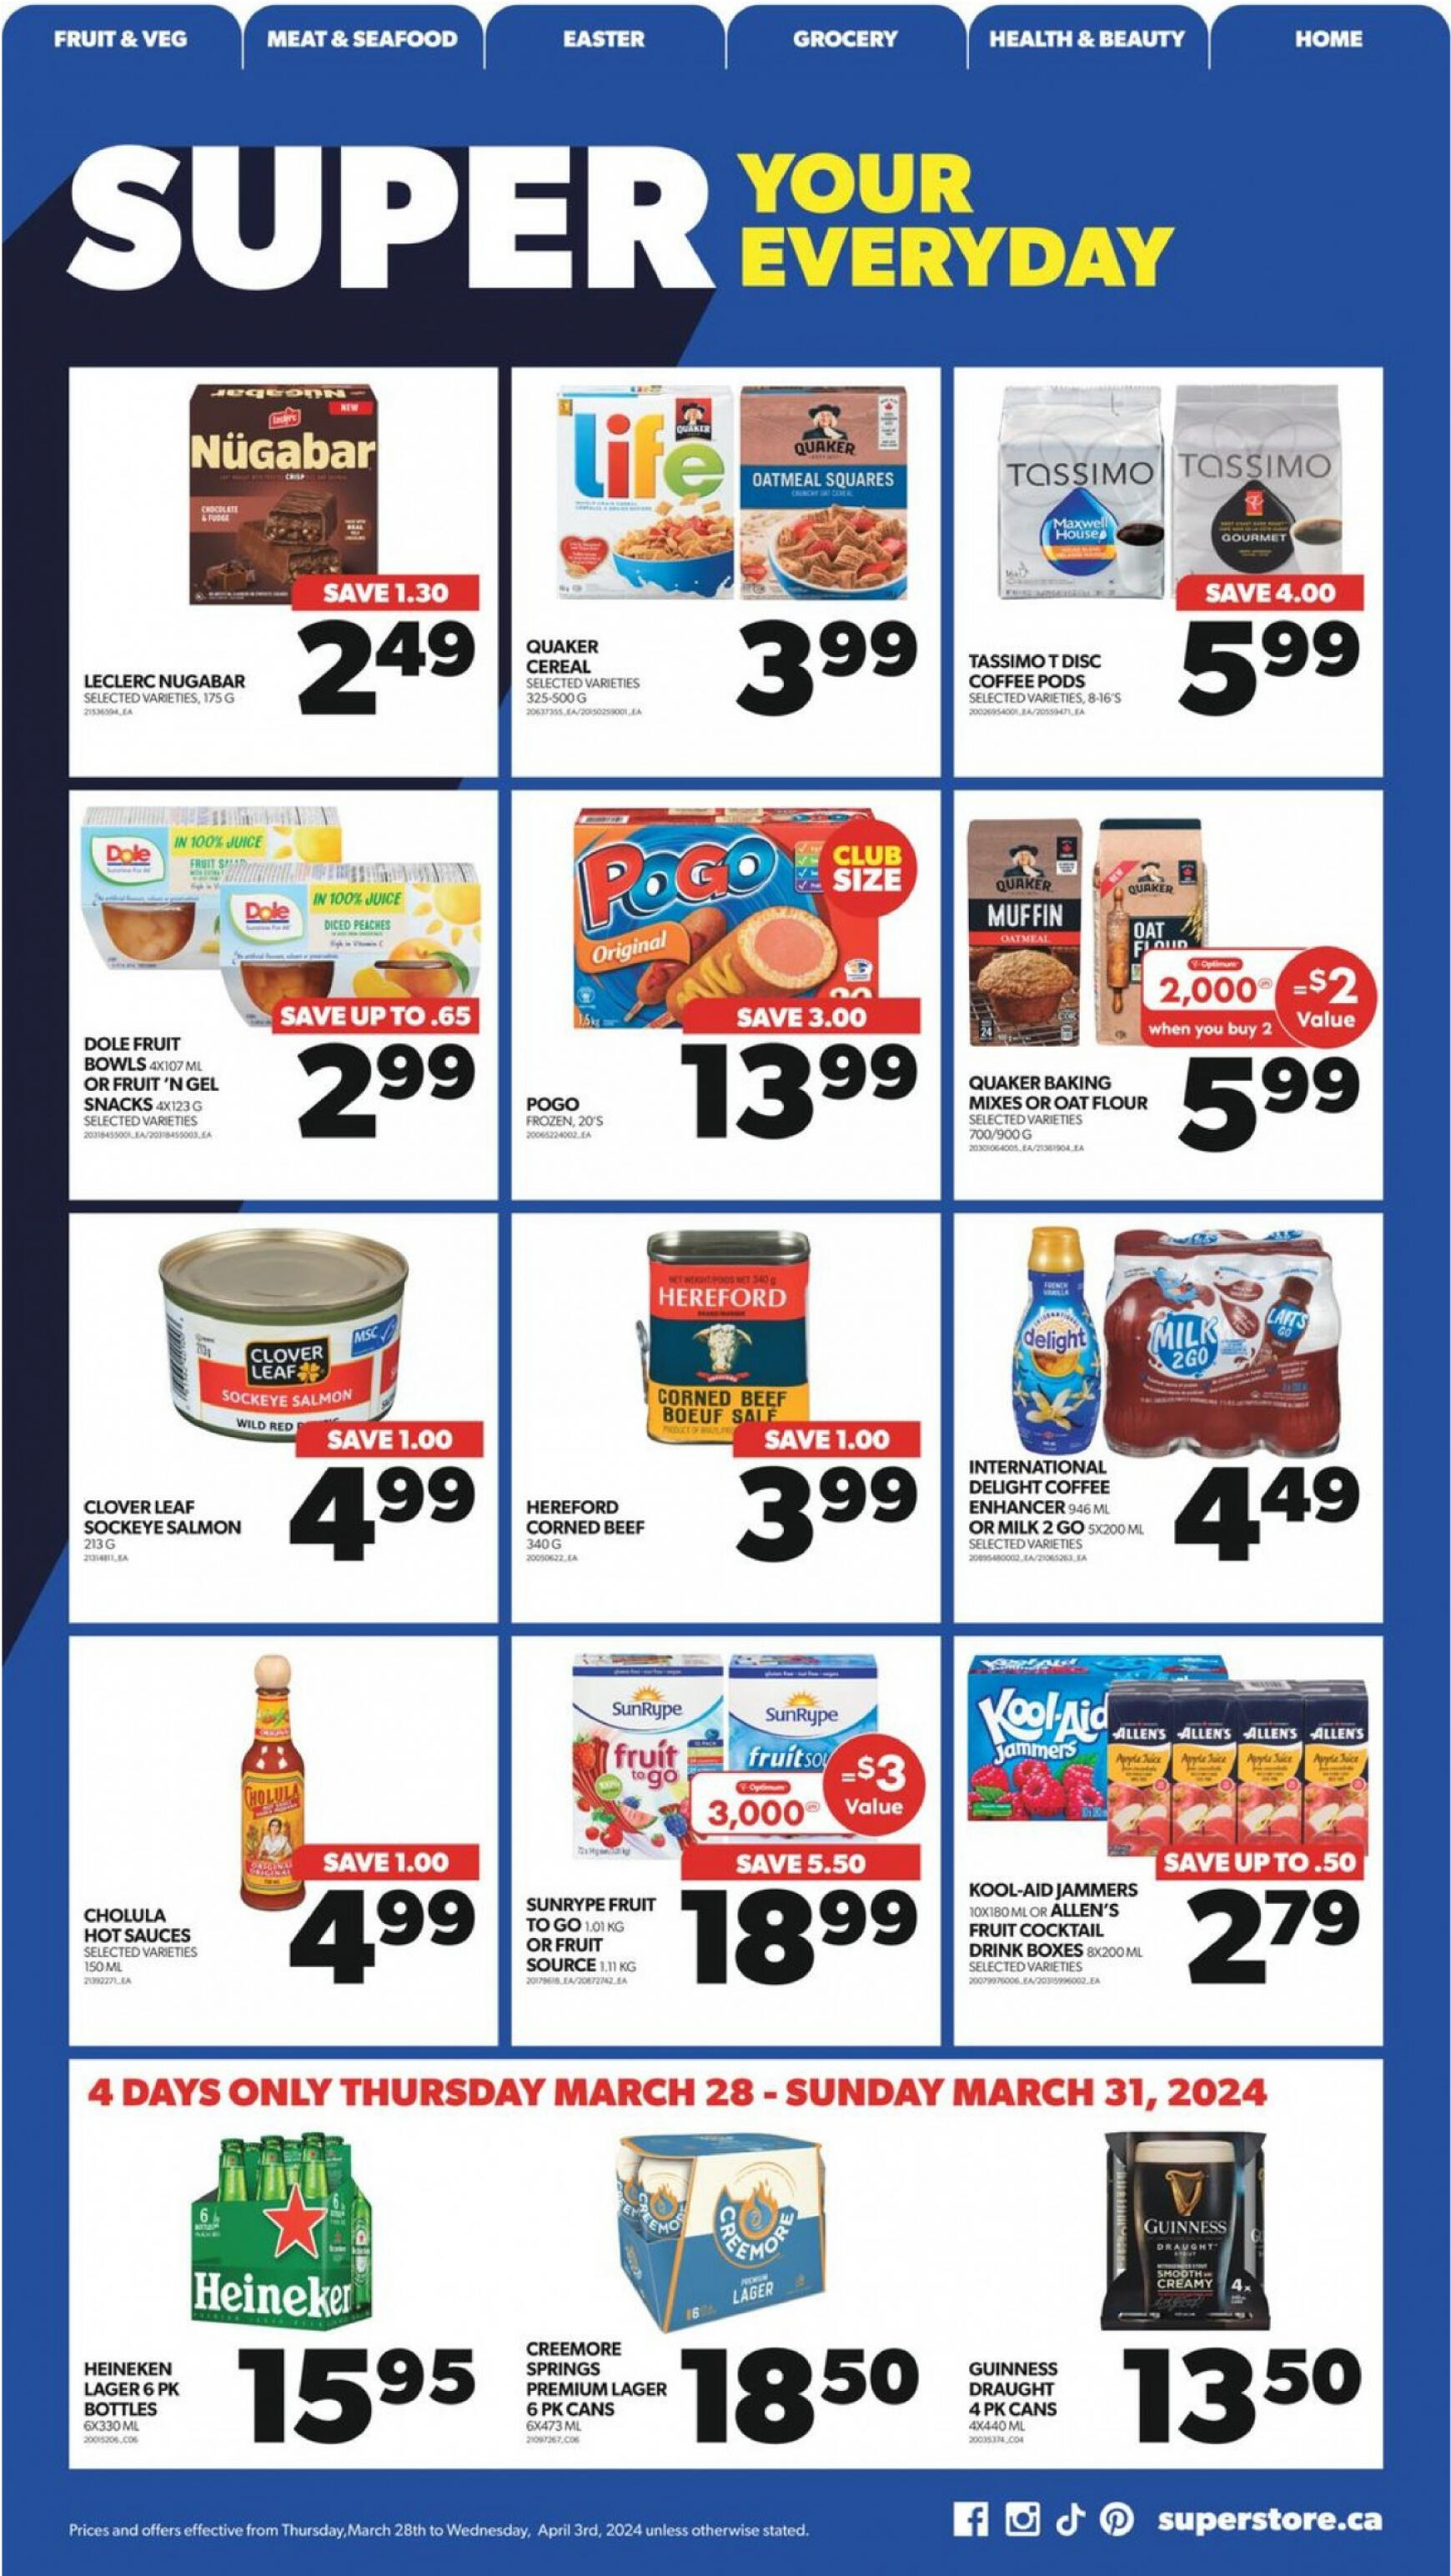 real-canadian-superstore - Real Canadian Superstore flyer current 28.03. - 03.04. - page: 21